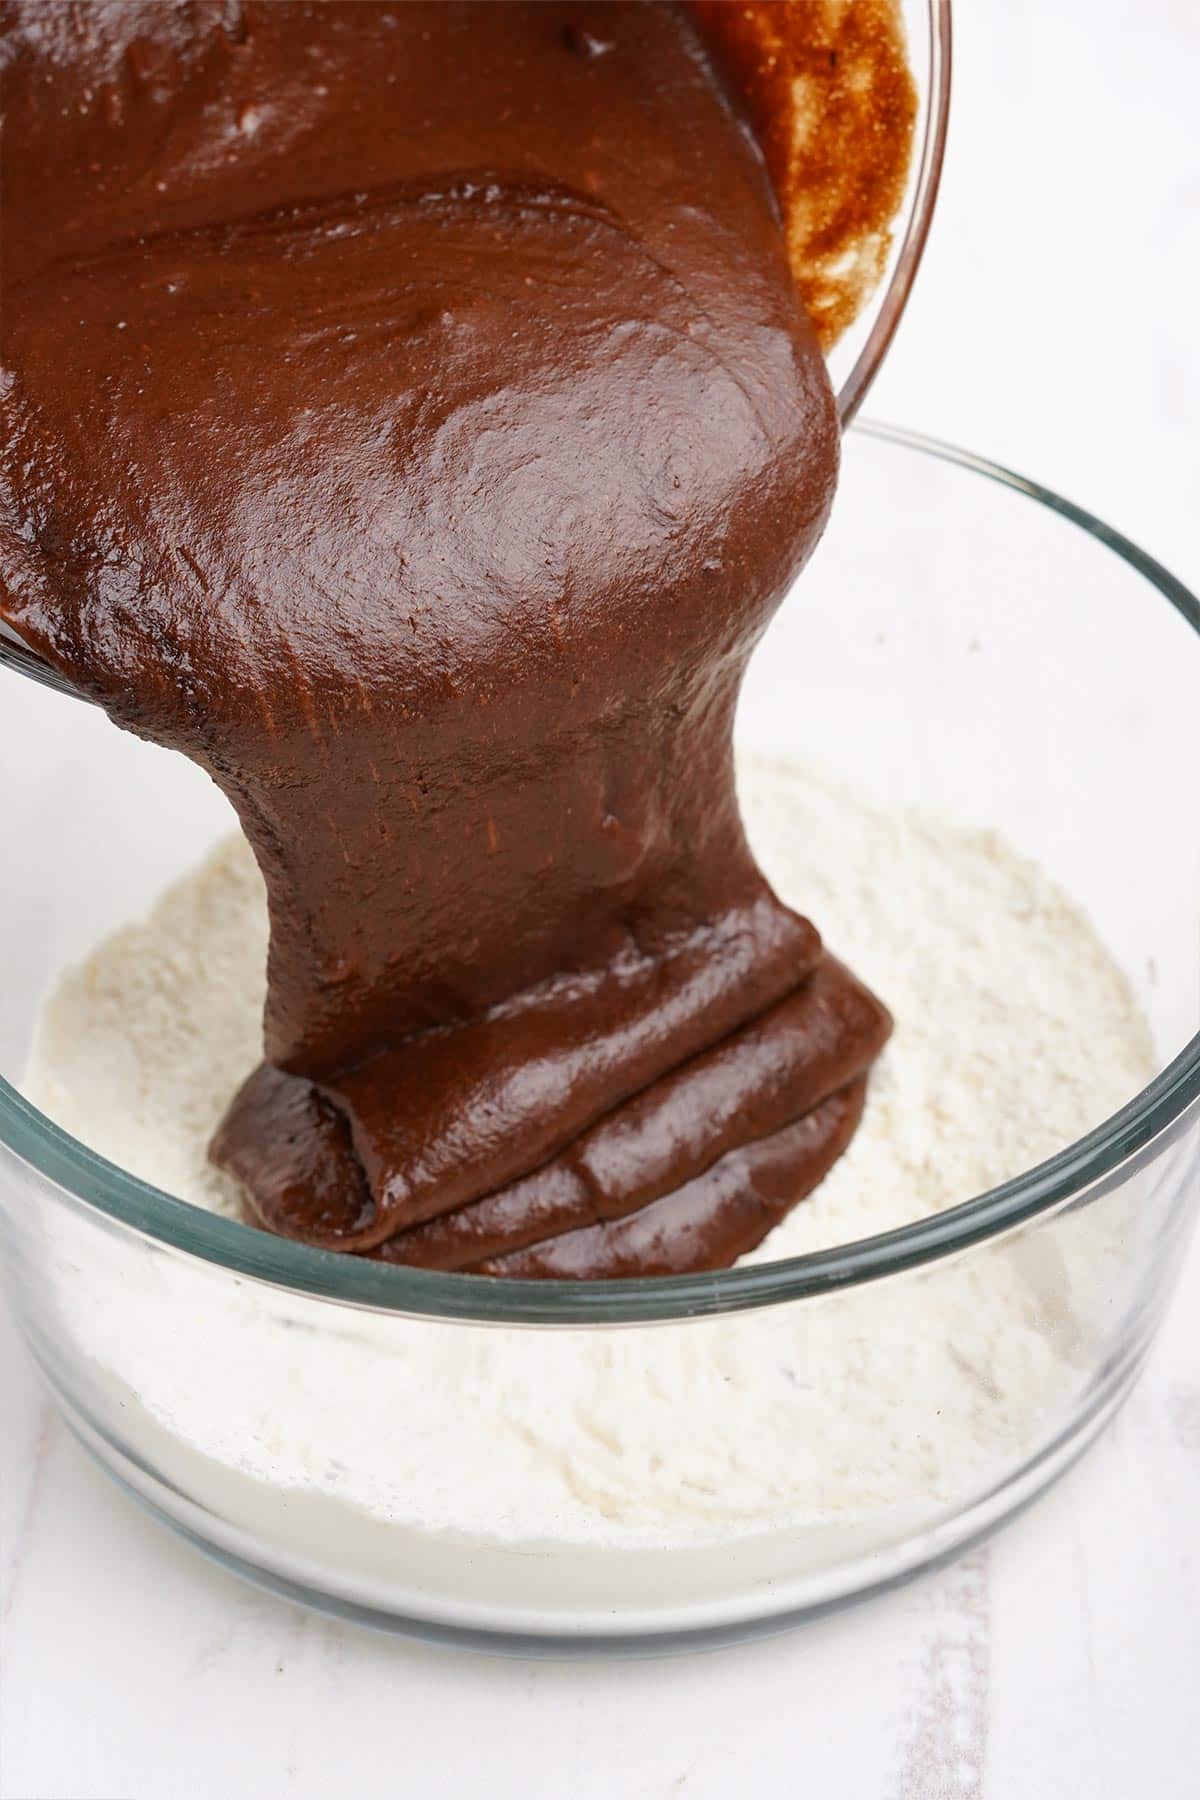 Pouring the chocolate batter into the flour.